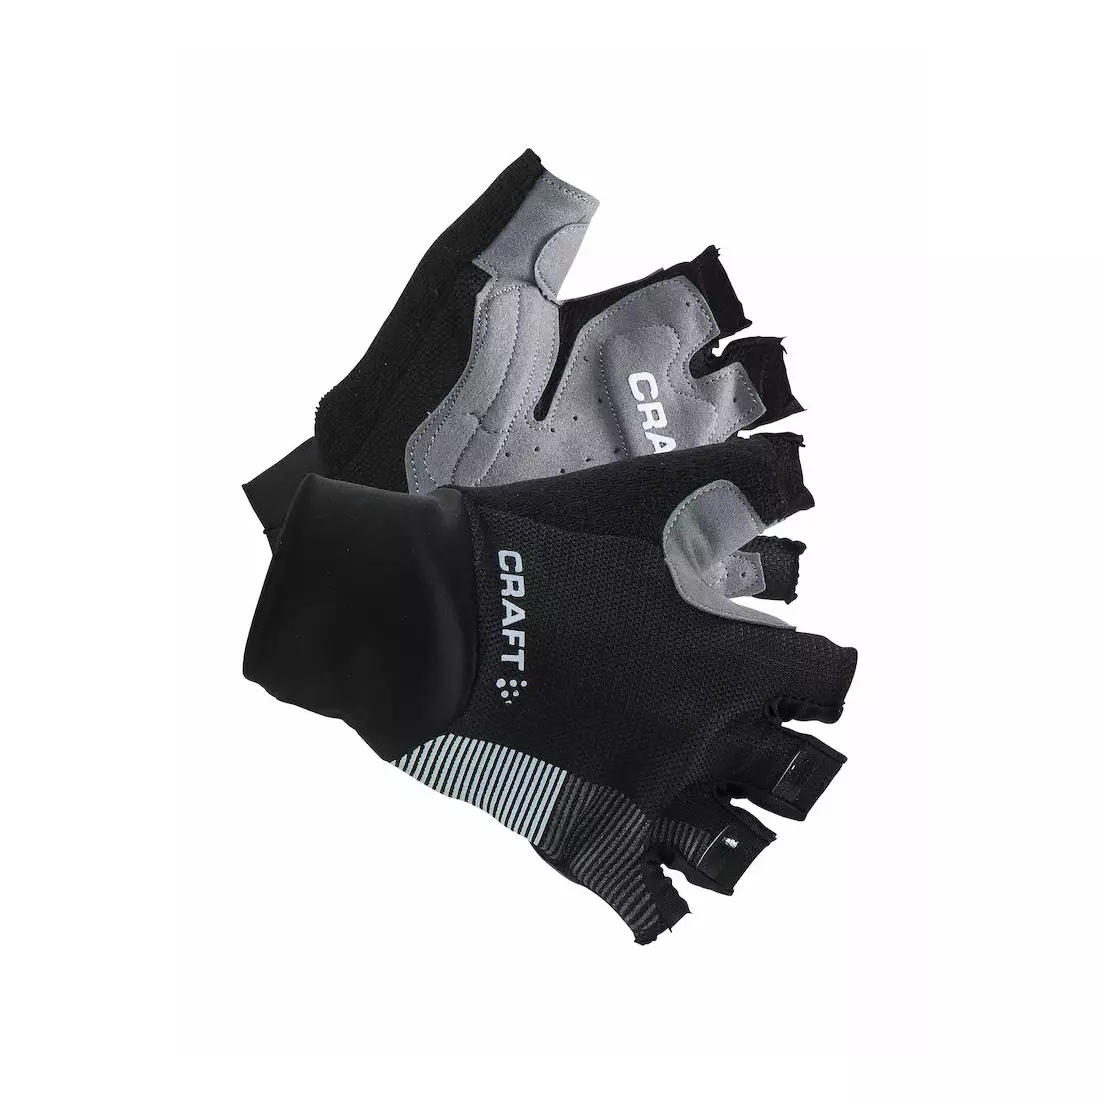 CRAFT GLOVE cycling gloves 1904123-9926